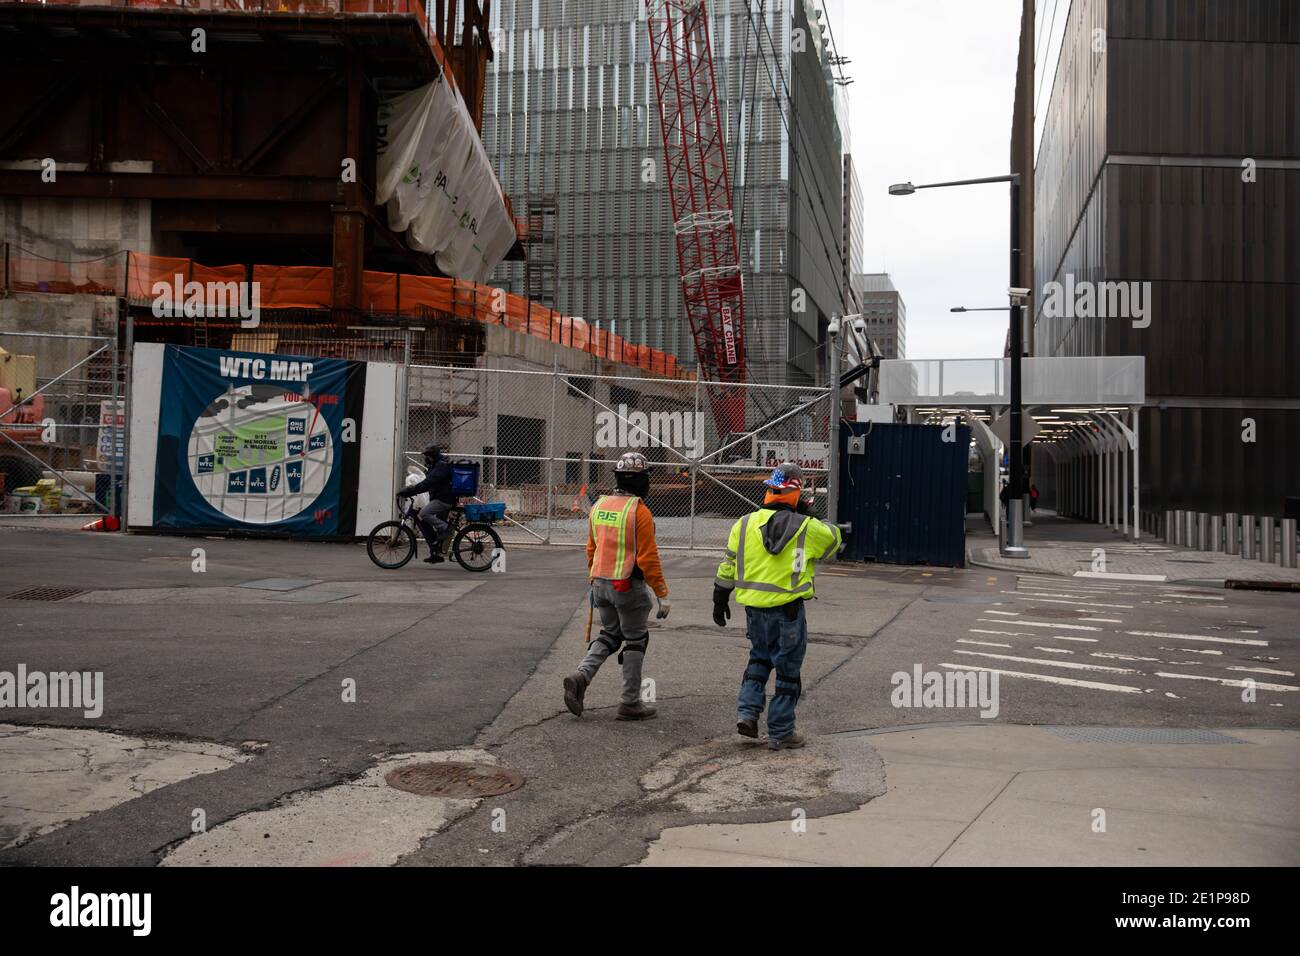 (210109) -- NEW YORK, Jan. 9, 2021 (Xinhua) -- Construction workers walk in front of the Ronald O. Perelman Performing Arts Center at the World Trade Center construction site, in New York, United States, Jan. 8, 2021. U.S. employers slashed 140,000 jobs in December, the first monthly decline since April 2020, as the recent COVID-19 spikes disrupted labor market recovery, the Labor Department reported Friday. The unemployment rate, which has been trending down over the past seven months, remained unchanged at 6.7 percent, according to the monthly employment report. (Photo by Michael Nagle/Xinhu Stock Photo